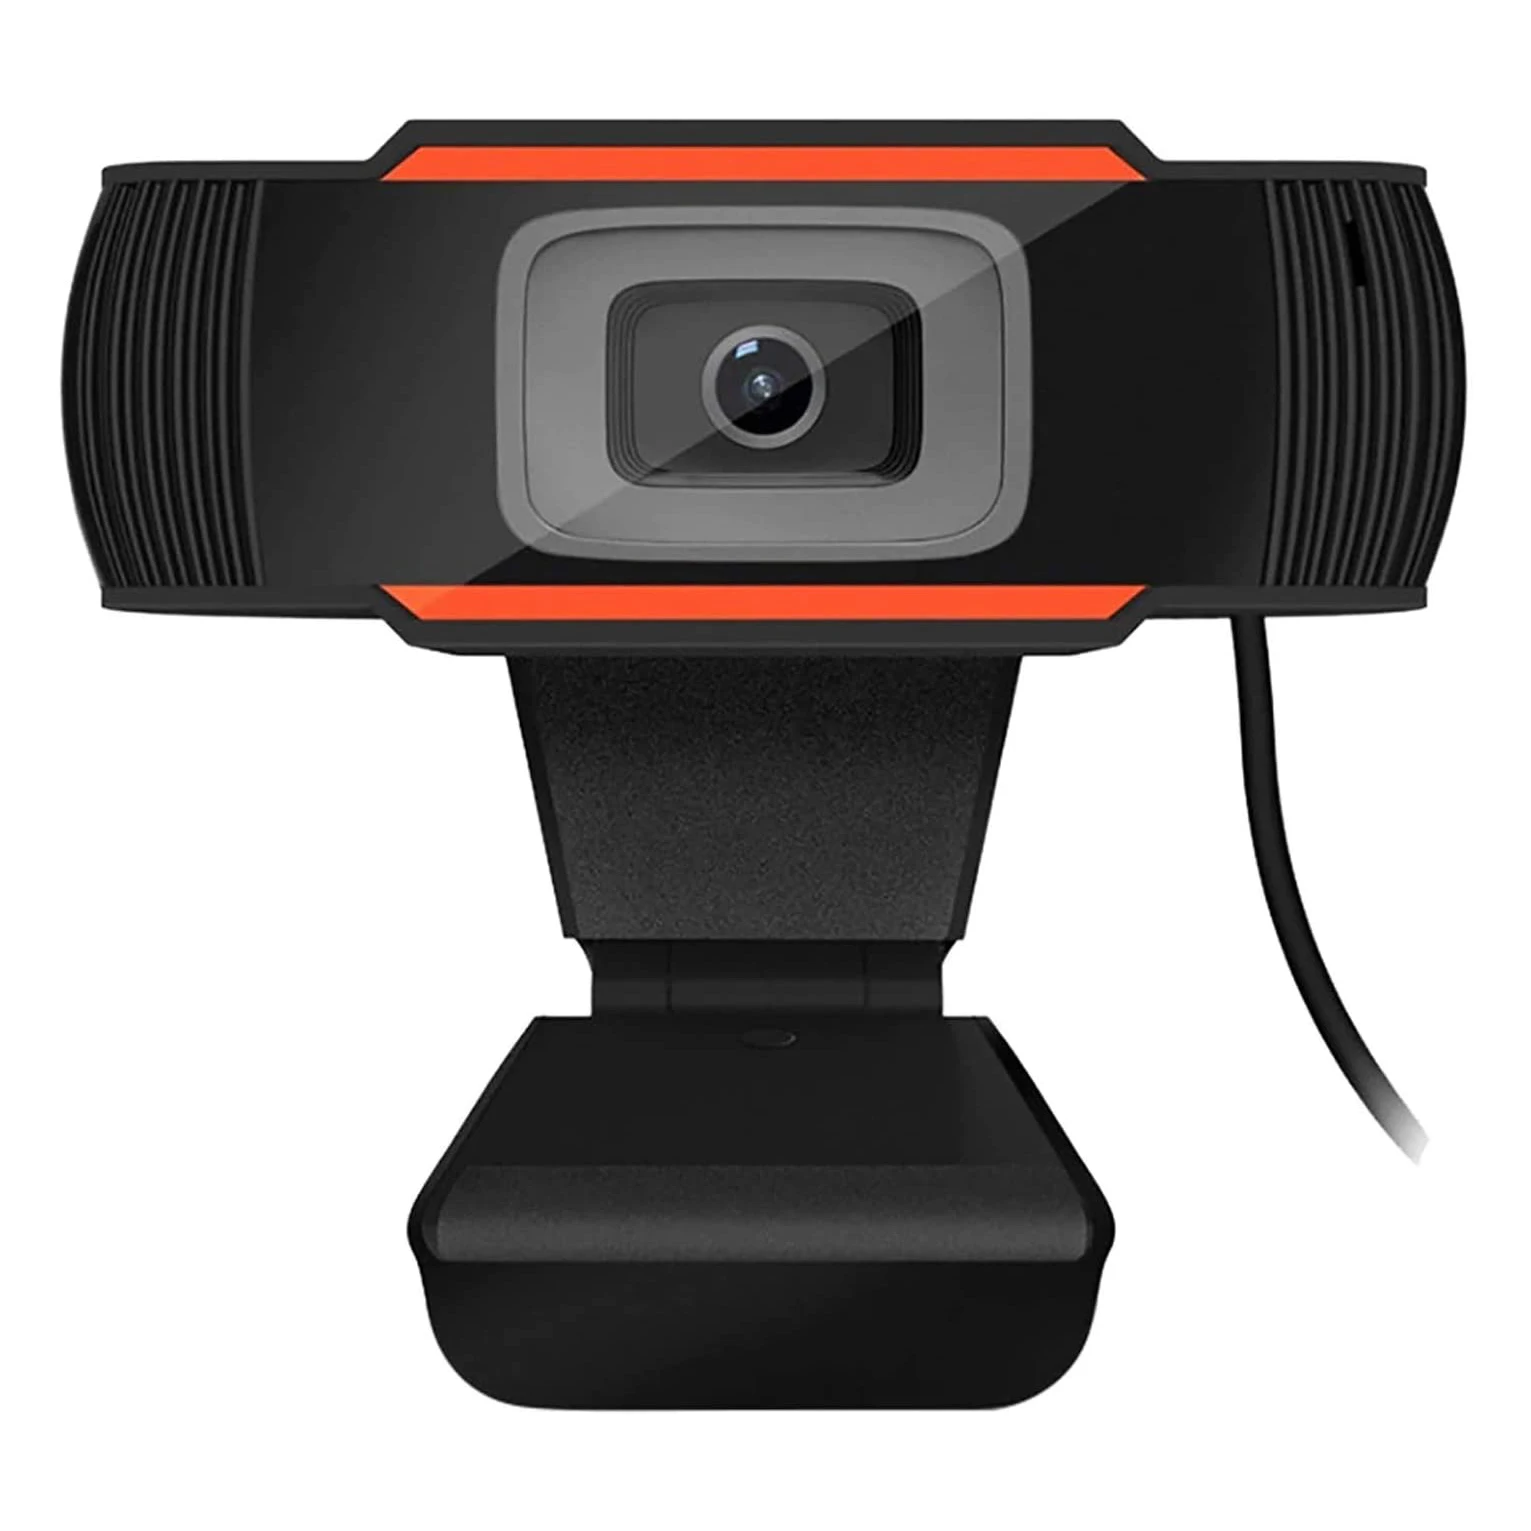 Full HD 1080P Built in Mic PC Web Camera Computer USB Webcam For Live Broadcast Video Calling Conference